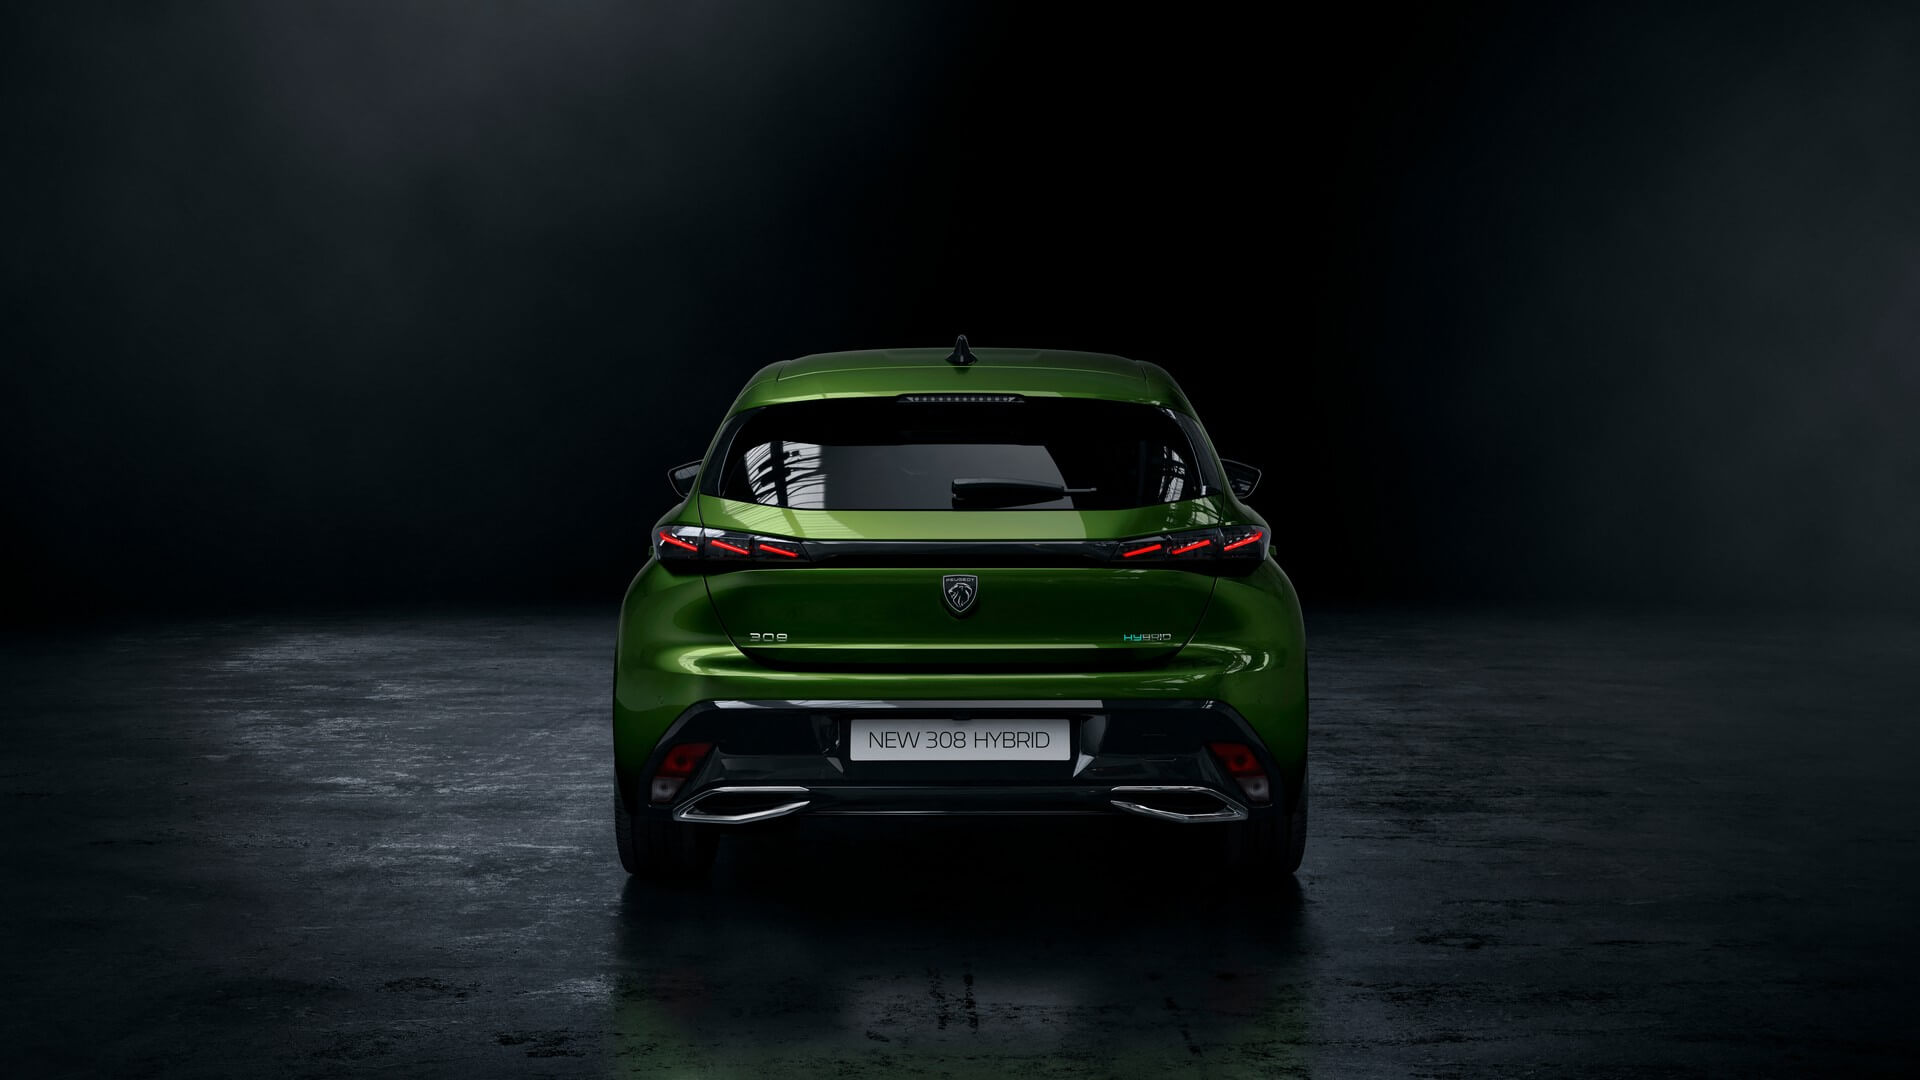 2021 Peugeot 308 debuts with two plug-in hybrid models, 37-mile